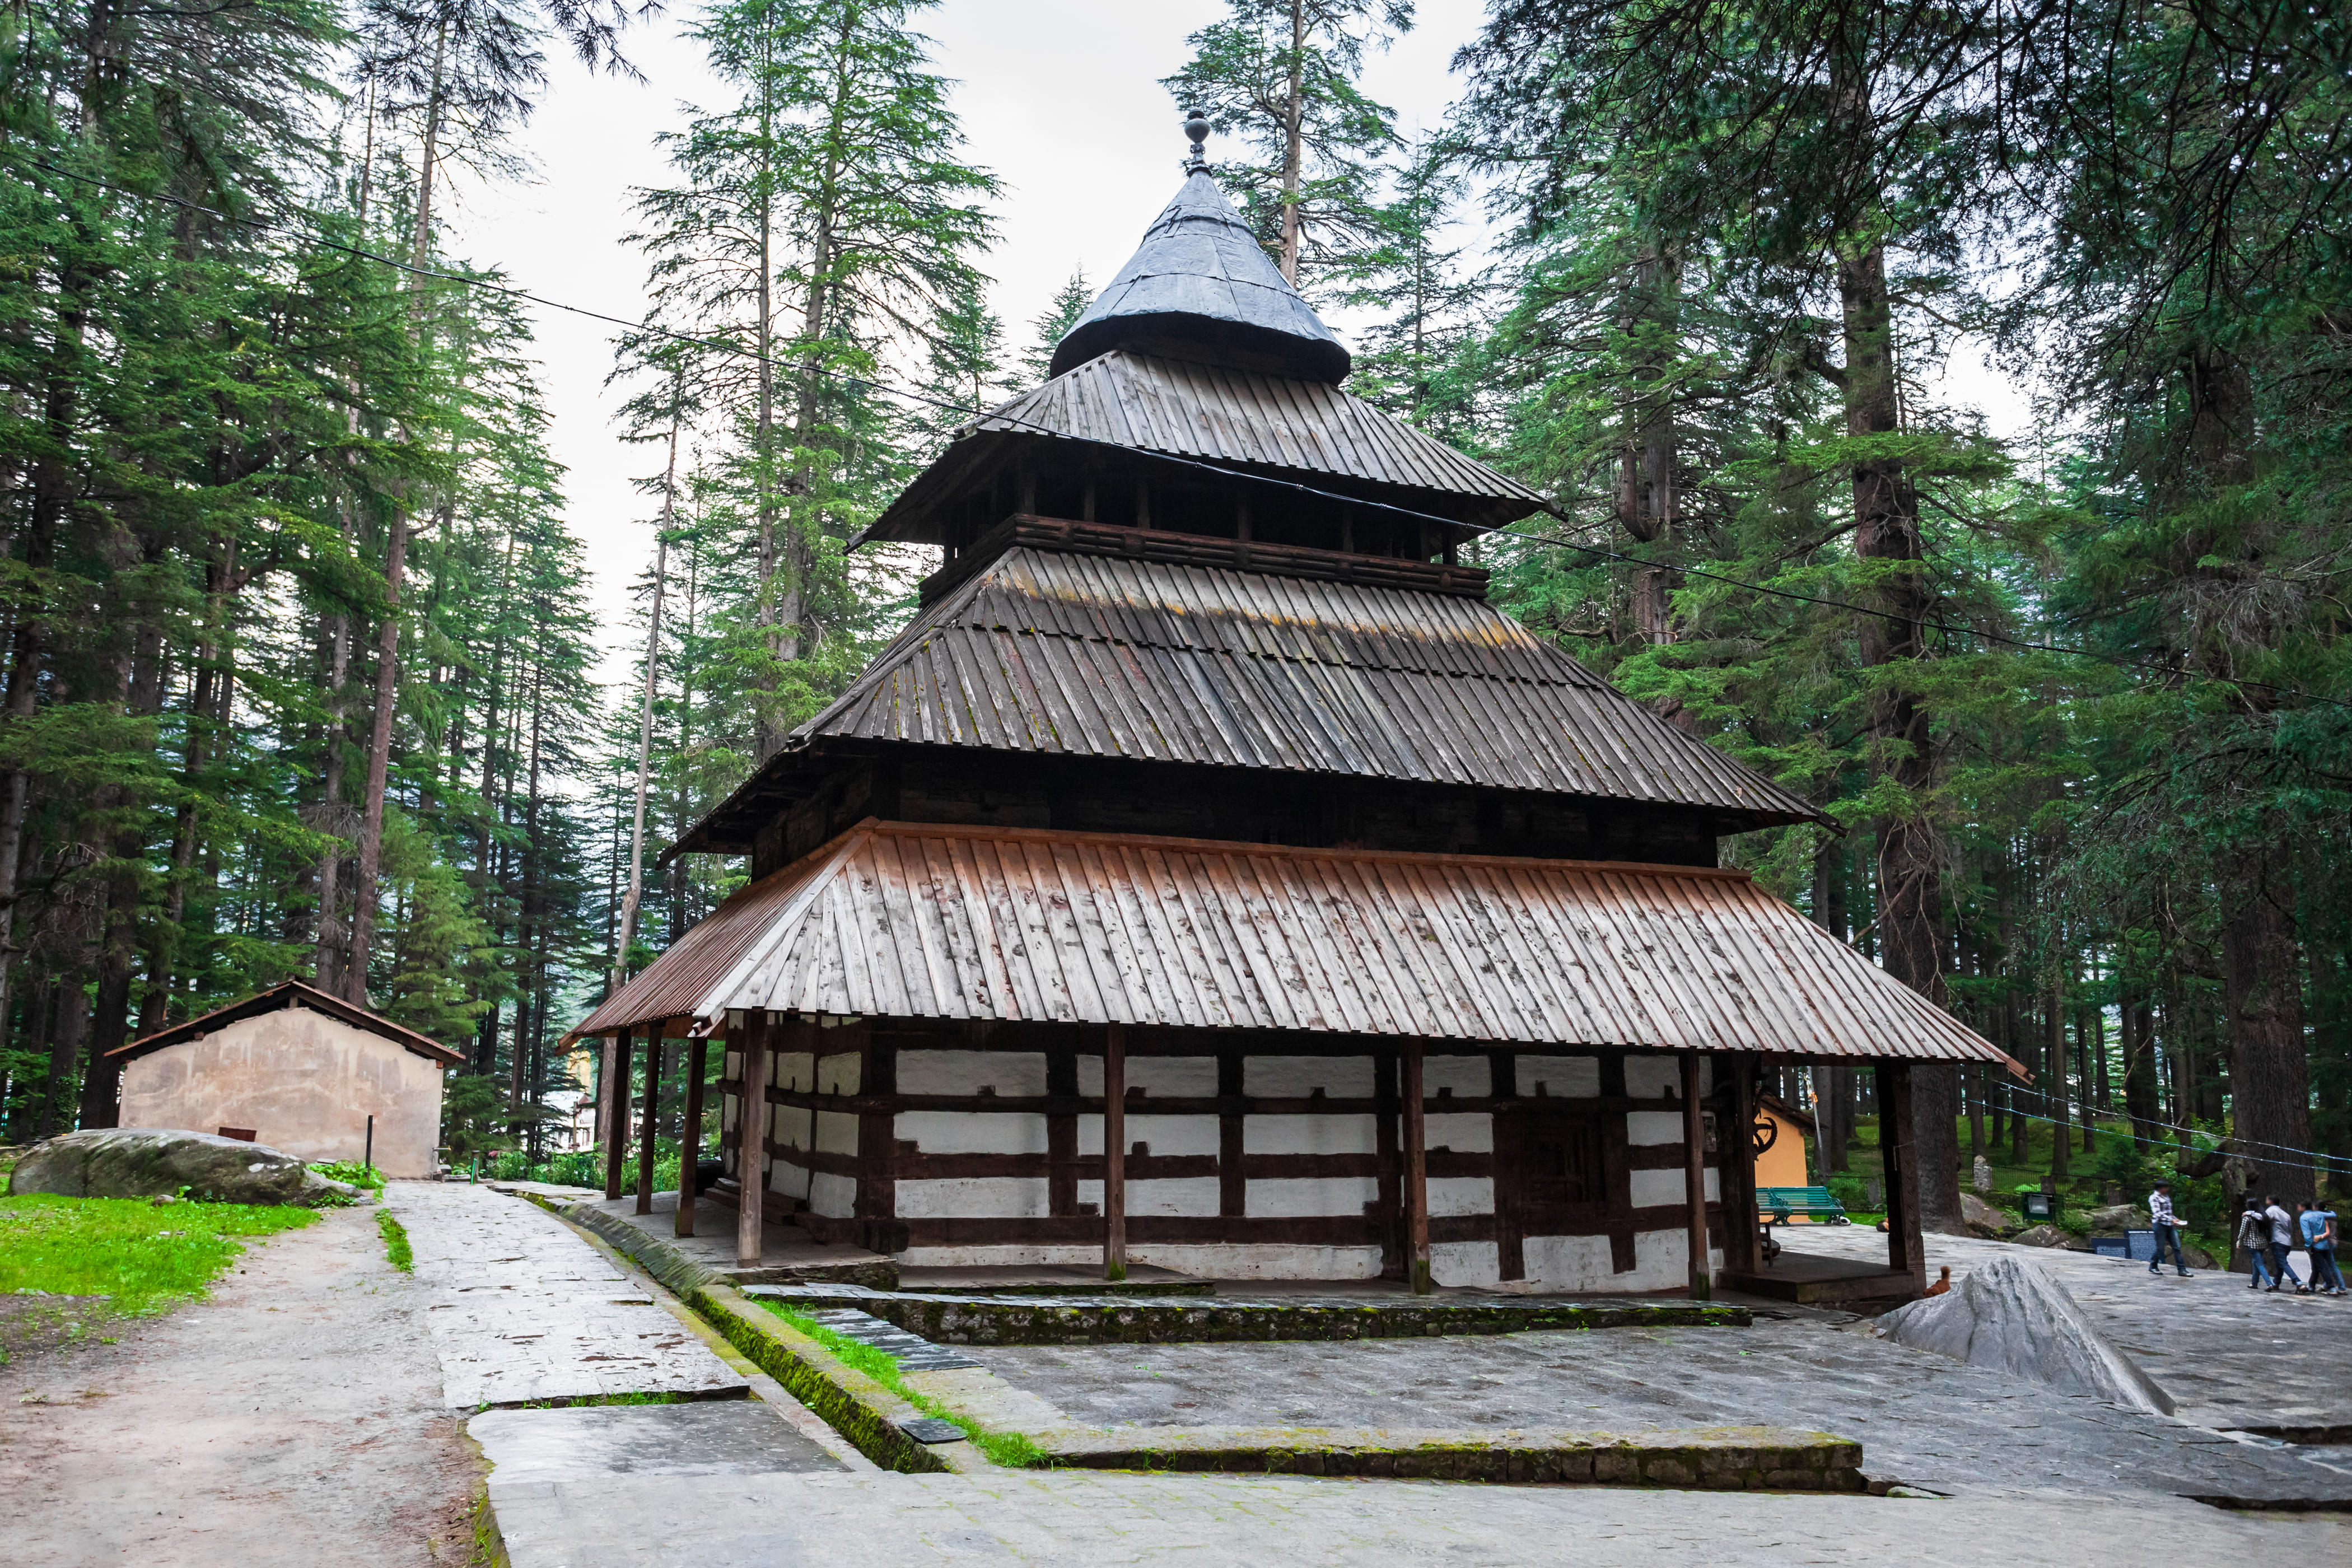 Manali Packages from Mumbai | Get Upto 50% Off